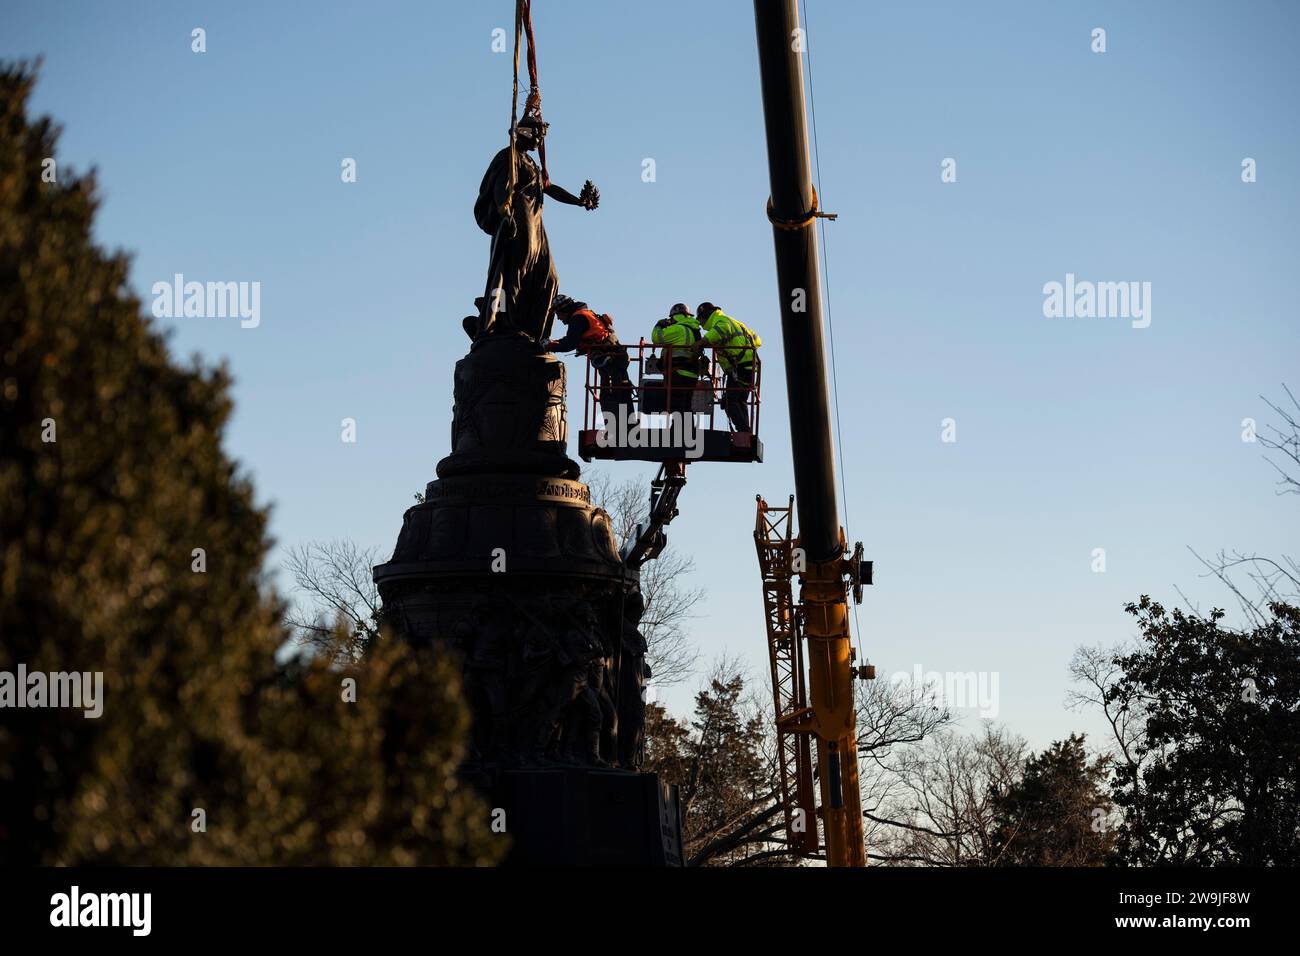 Arlington, United States of America. 20 December, 2023. Workers attach webbing to the bronze statue on the Confederate Memorial in Section 16 of Arlington National Cemetery before removal by crane, December 20, 2023 in Arlington, Virginia. The memorial honoring members of the Confederate States of America is being moved to New Market Battlefield State Historic Park.  Credit: Elizabeth Fraser/U.S. Army/Alamy Live News Stock Photo